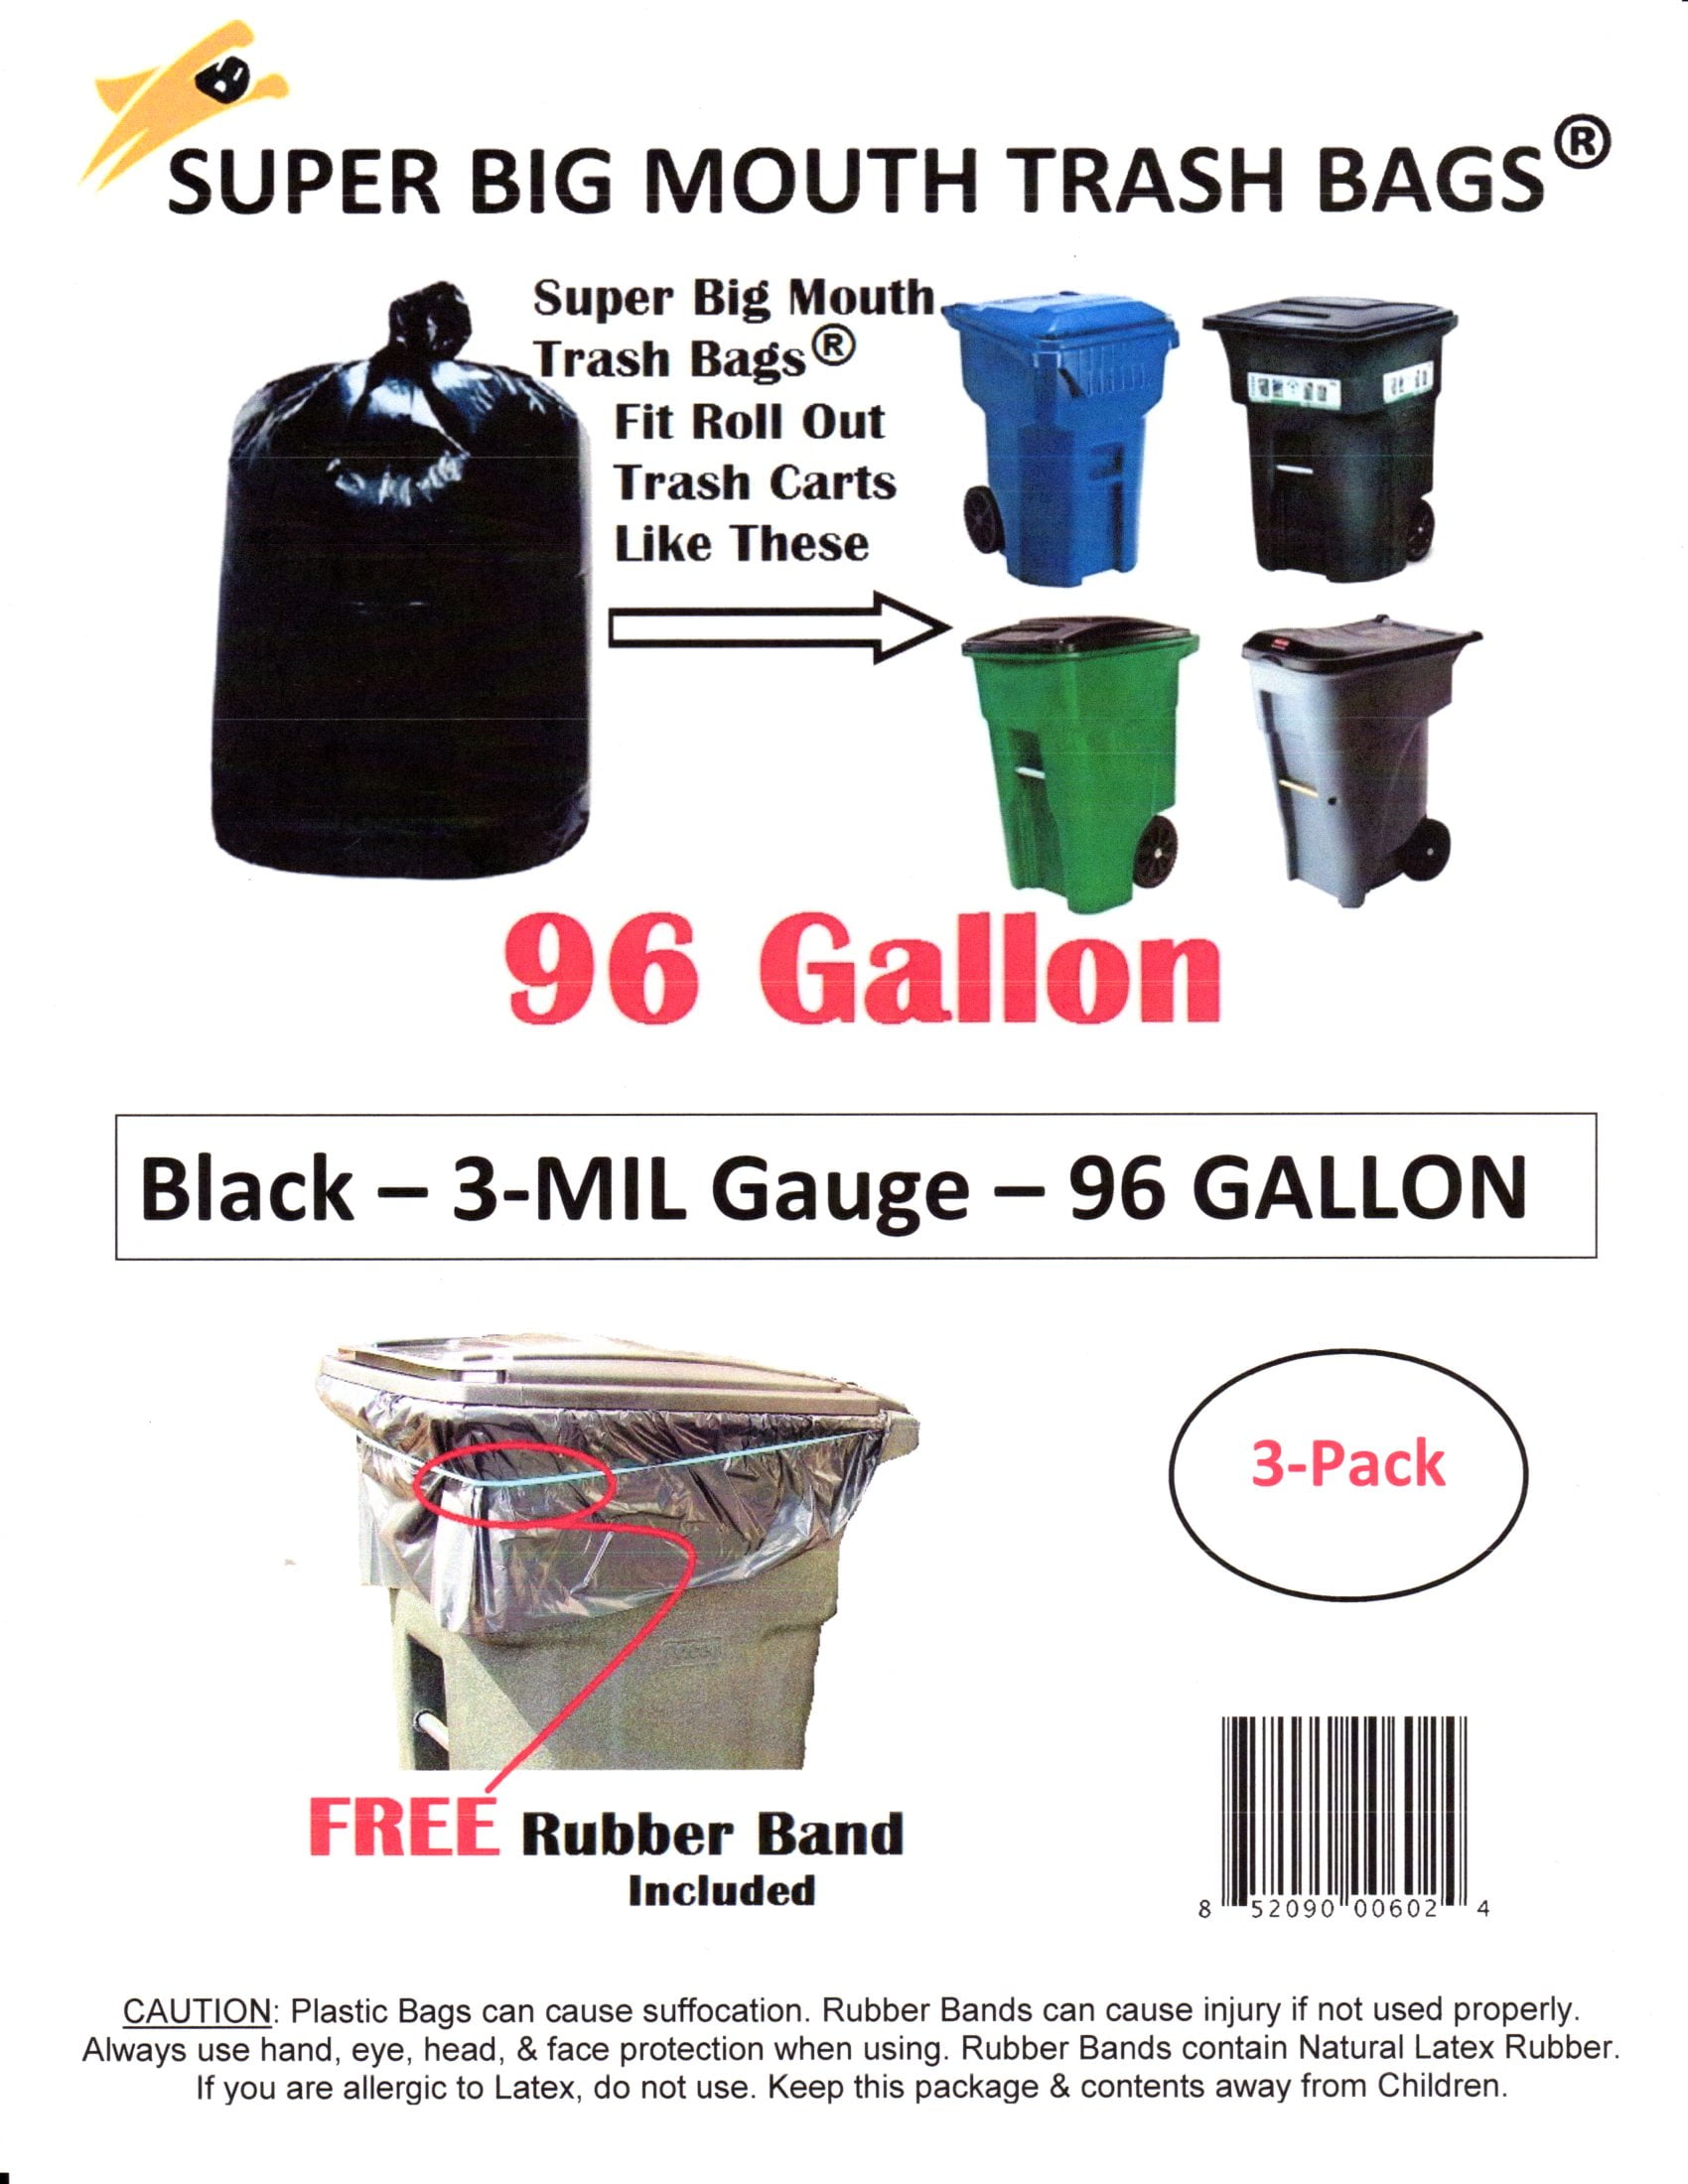 Details about   Super Extra Large RUBBER BANDS Tie-Downs for 64/65/68/70/80 Gallon Trash Carts 